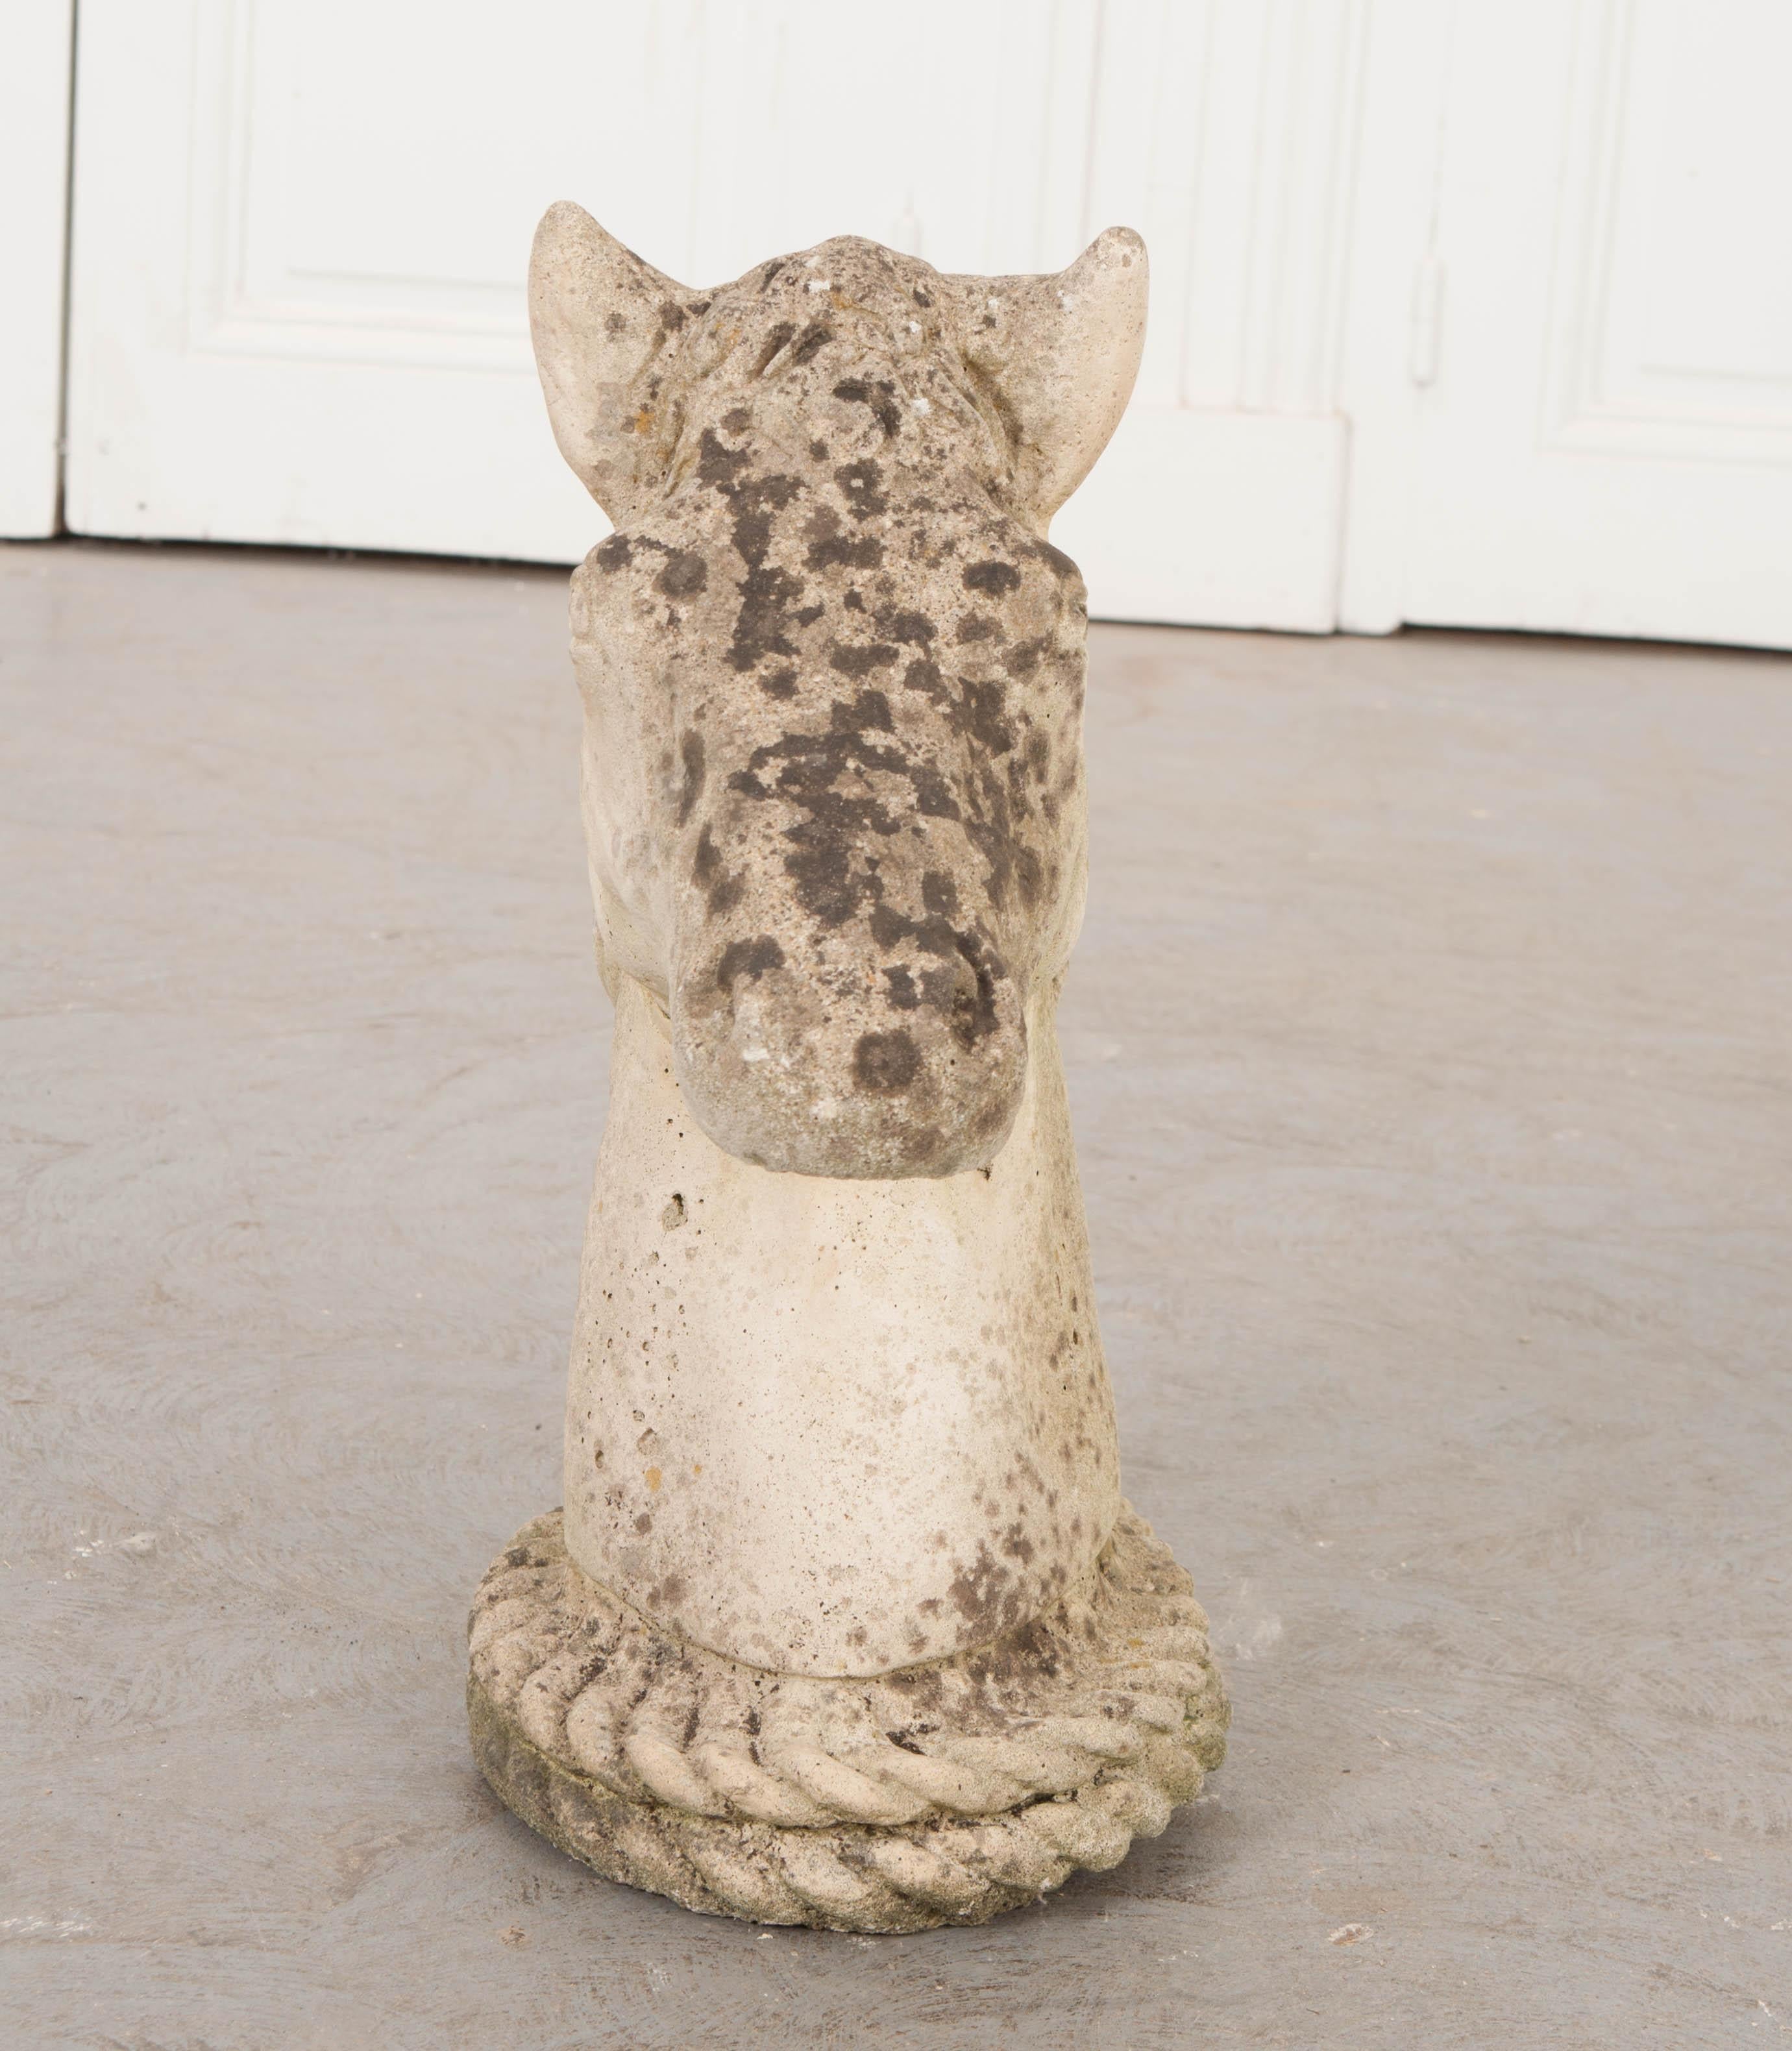 This beautifully aged English stone horse head, circa 1880s, likely one of a pair mounted atop the entry posts of a stone wall, would make a great decorative element outdoors or as an indoor sculptural piece.